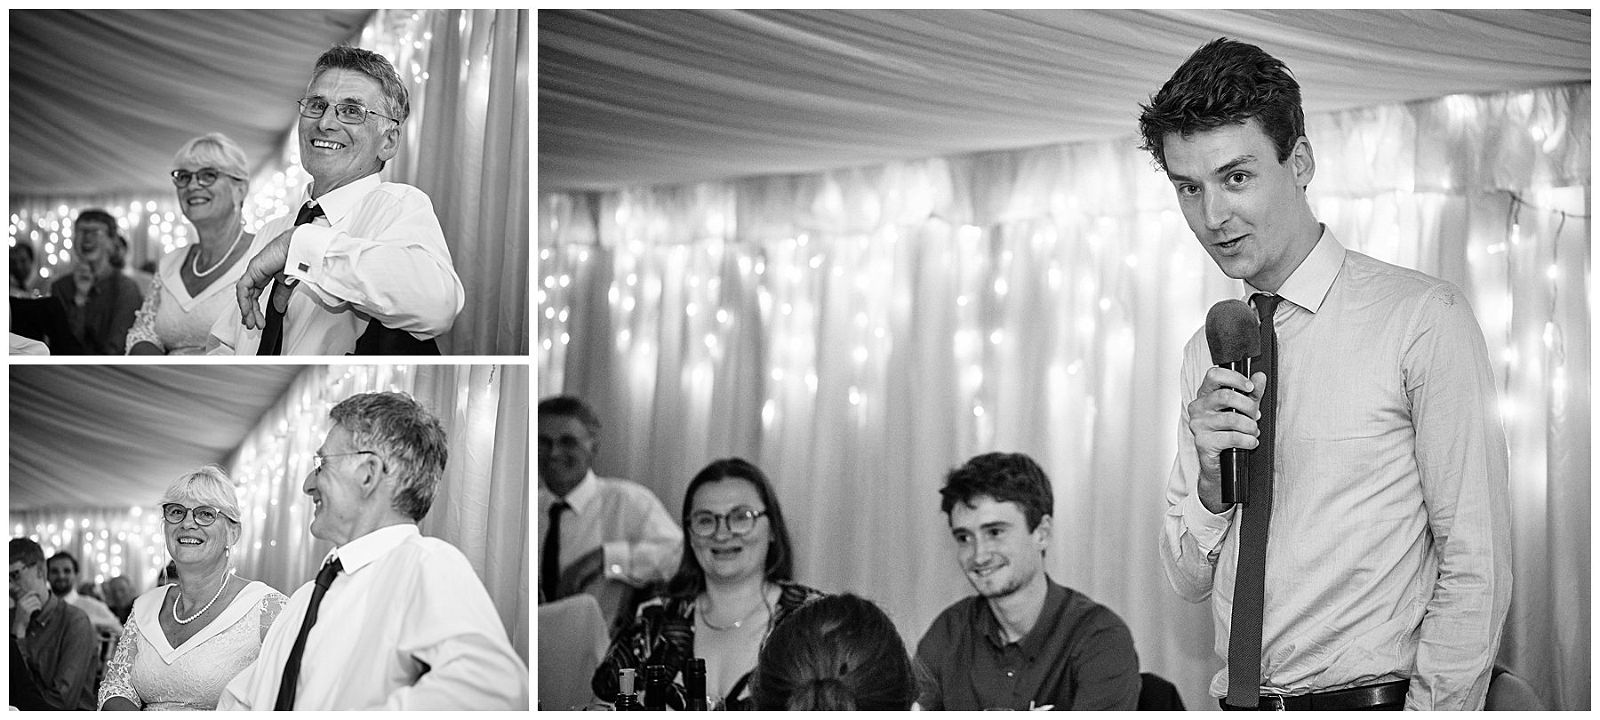 Time for the grooms son to take centre stage as best man to a rousing reception at Goldstone Hall in Shropshire by Documentary Wedding Photographer Stuart James